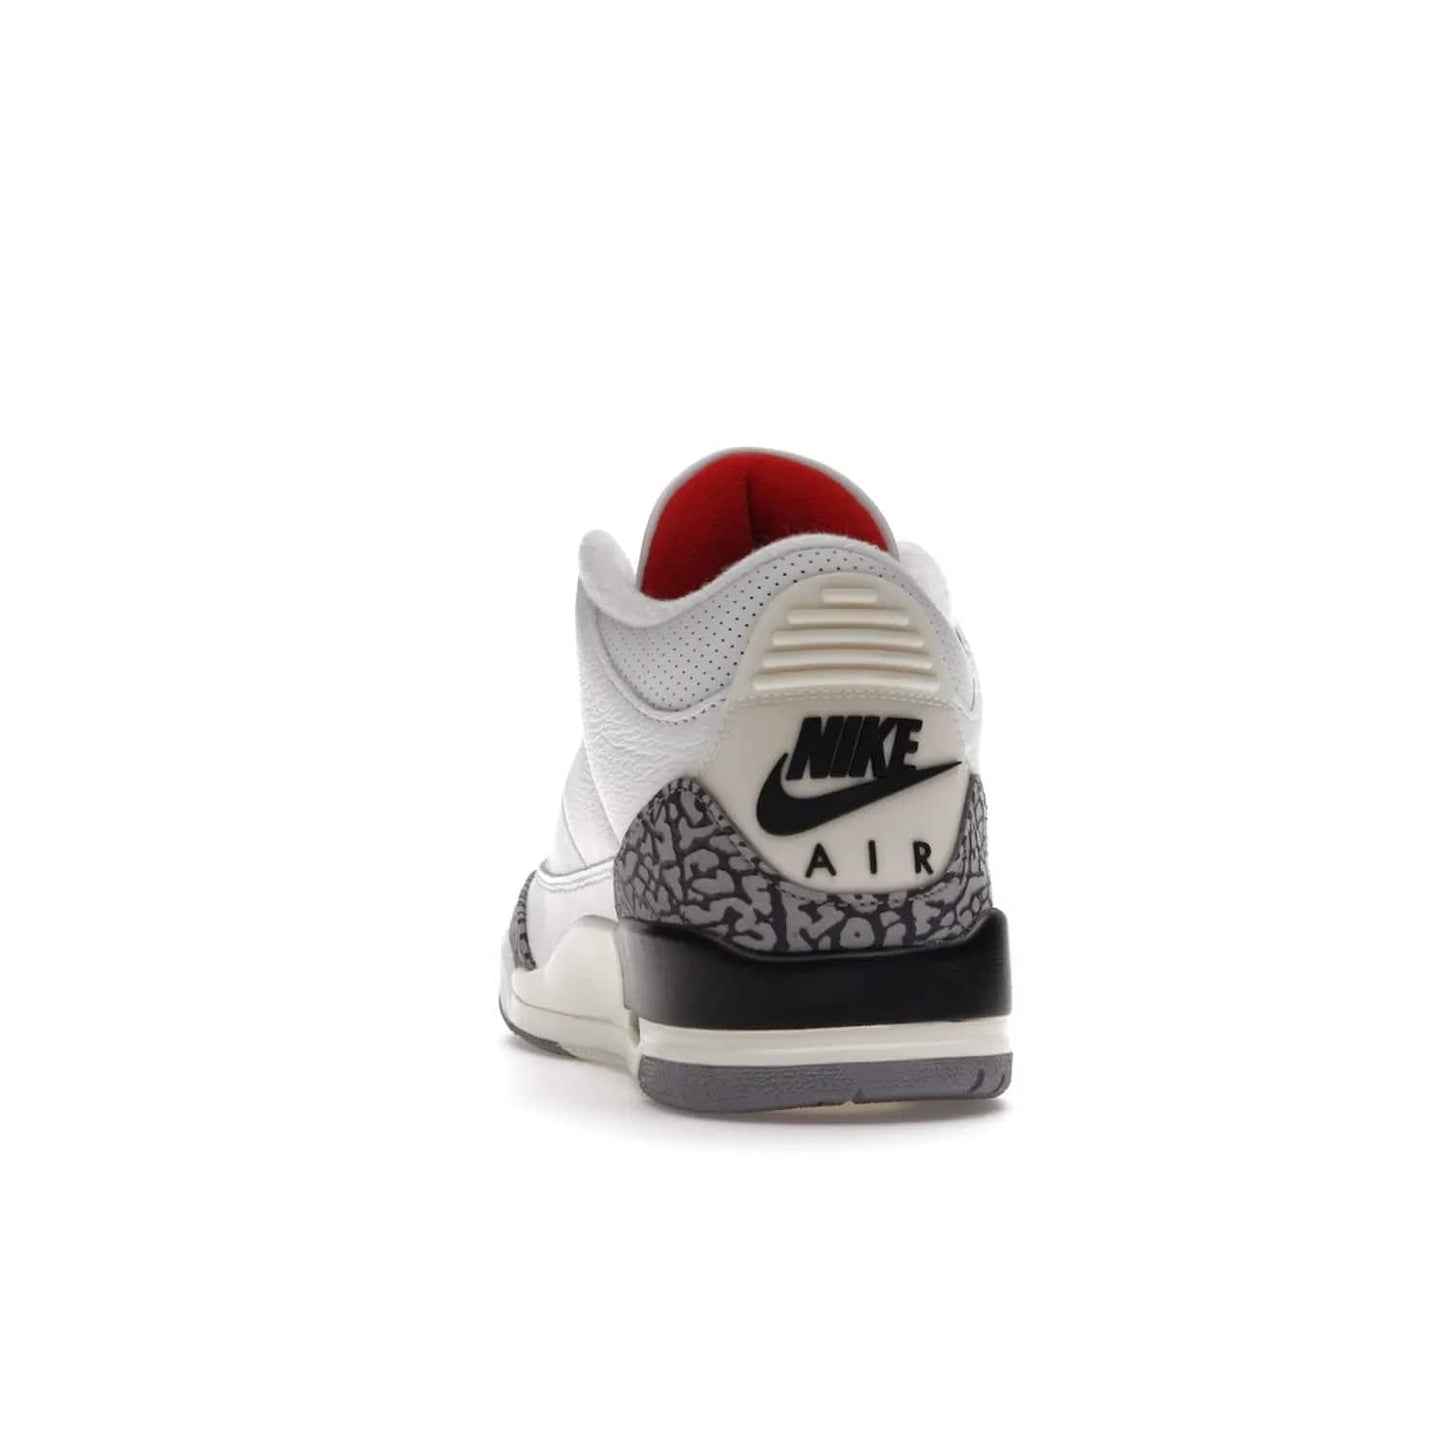 Jordan 3 Retro White Cement Reimagined - Image 27 - Only at www.BallersClubKickz.com - The Reimagined Air Jordan 3 Retro in a Summit White/Fire Red/Black/Cement Grey colorway is launching on March 11, 2023. Featuring a white leather upper, off-white midsoles and heel tabs, this vintage-look sneaker is a must-have.